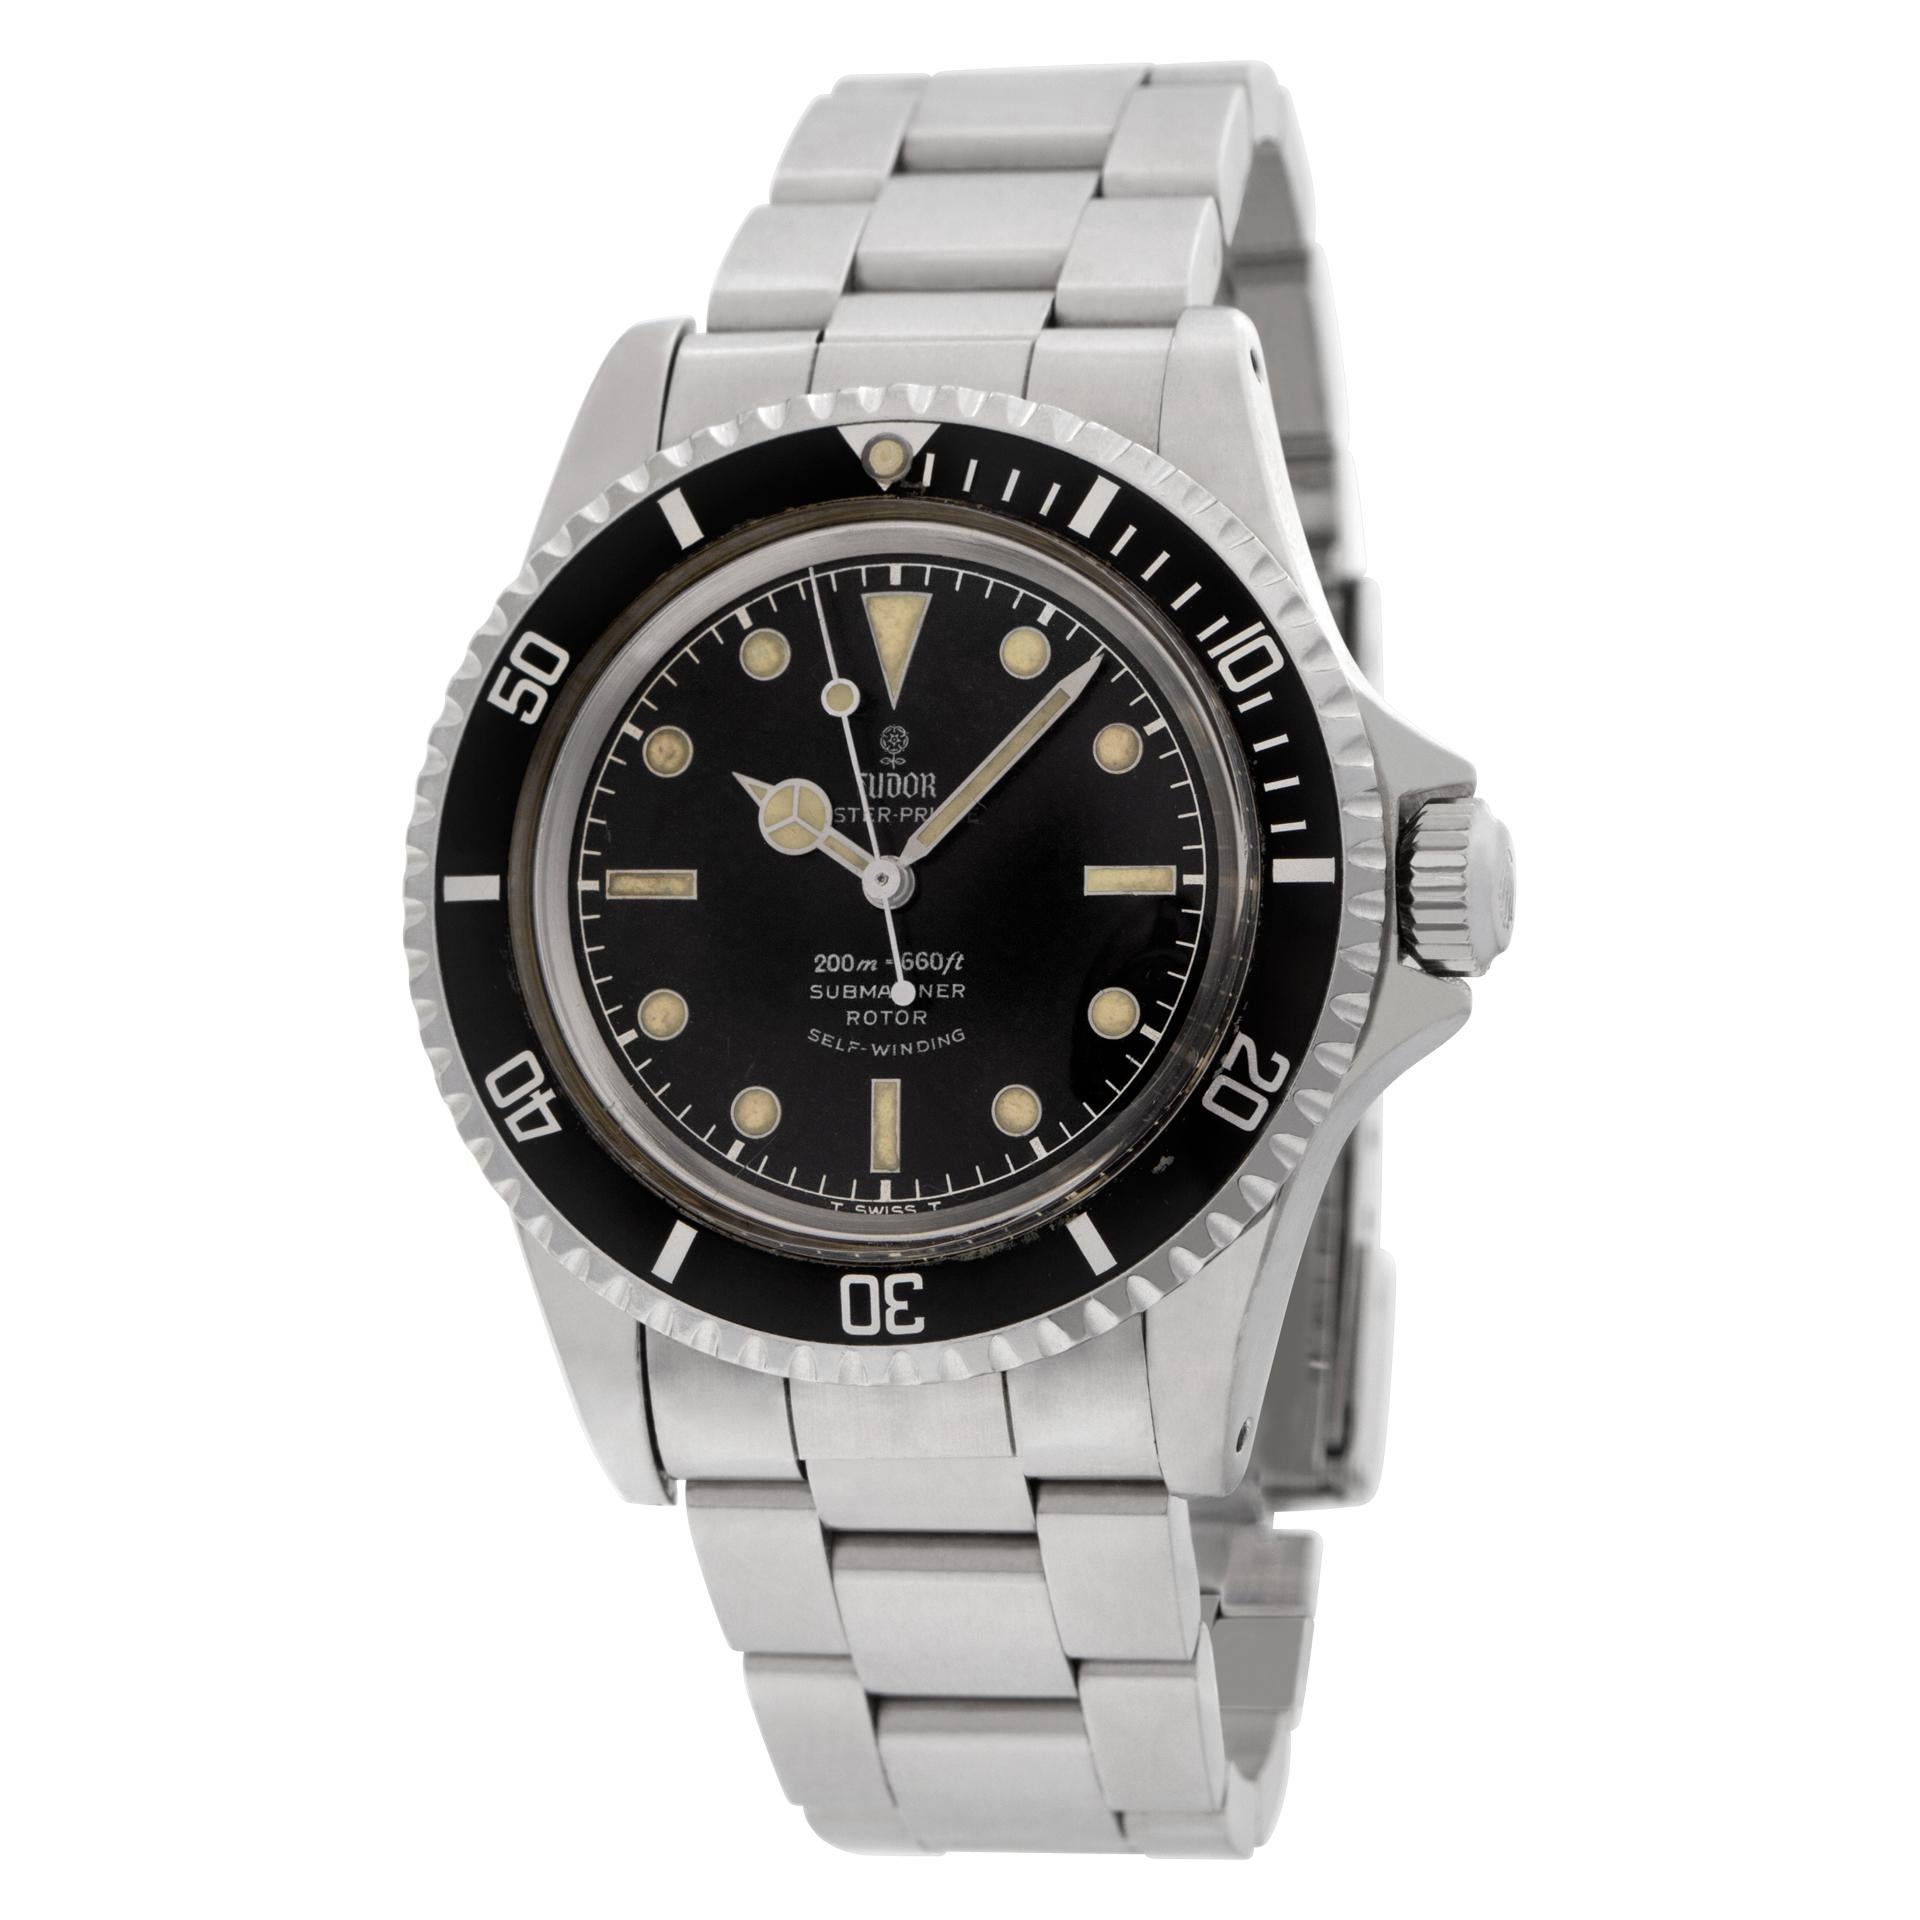 Tudor Submariner No Date in stainless steel. Untouched, original dial and hands.  Auto w/ sweep seconds. **Bank wire only at this price.** Ref 7928. Circa 1967. Fine Pre-owned Tudor Watch.

 Certified preowned Tudor Submariner No Date 7928 watch is